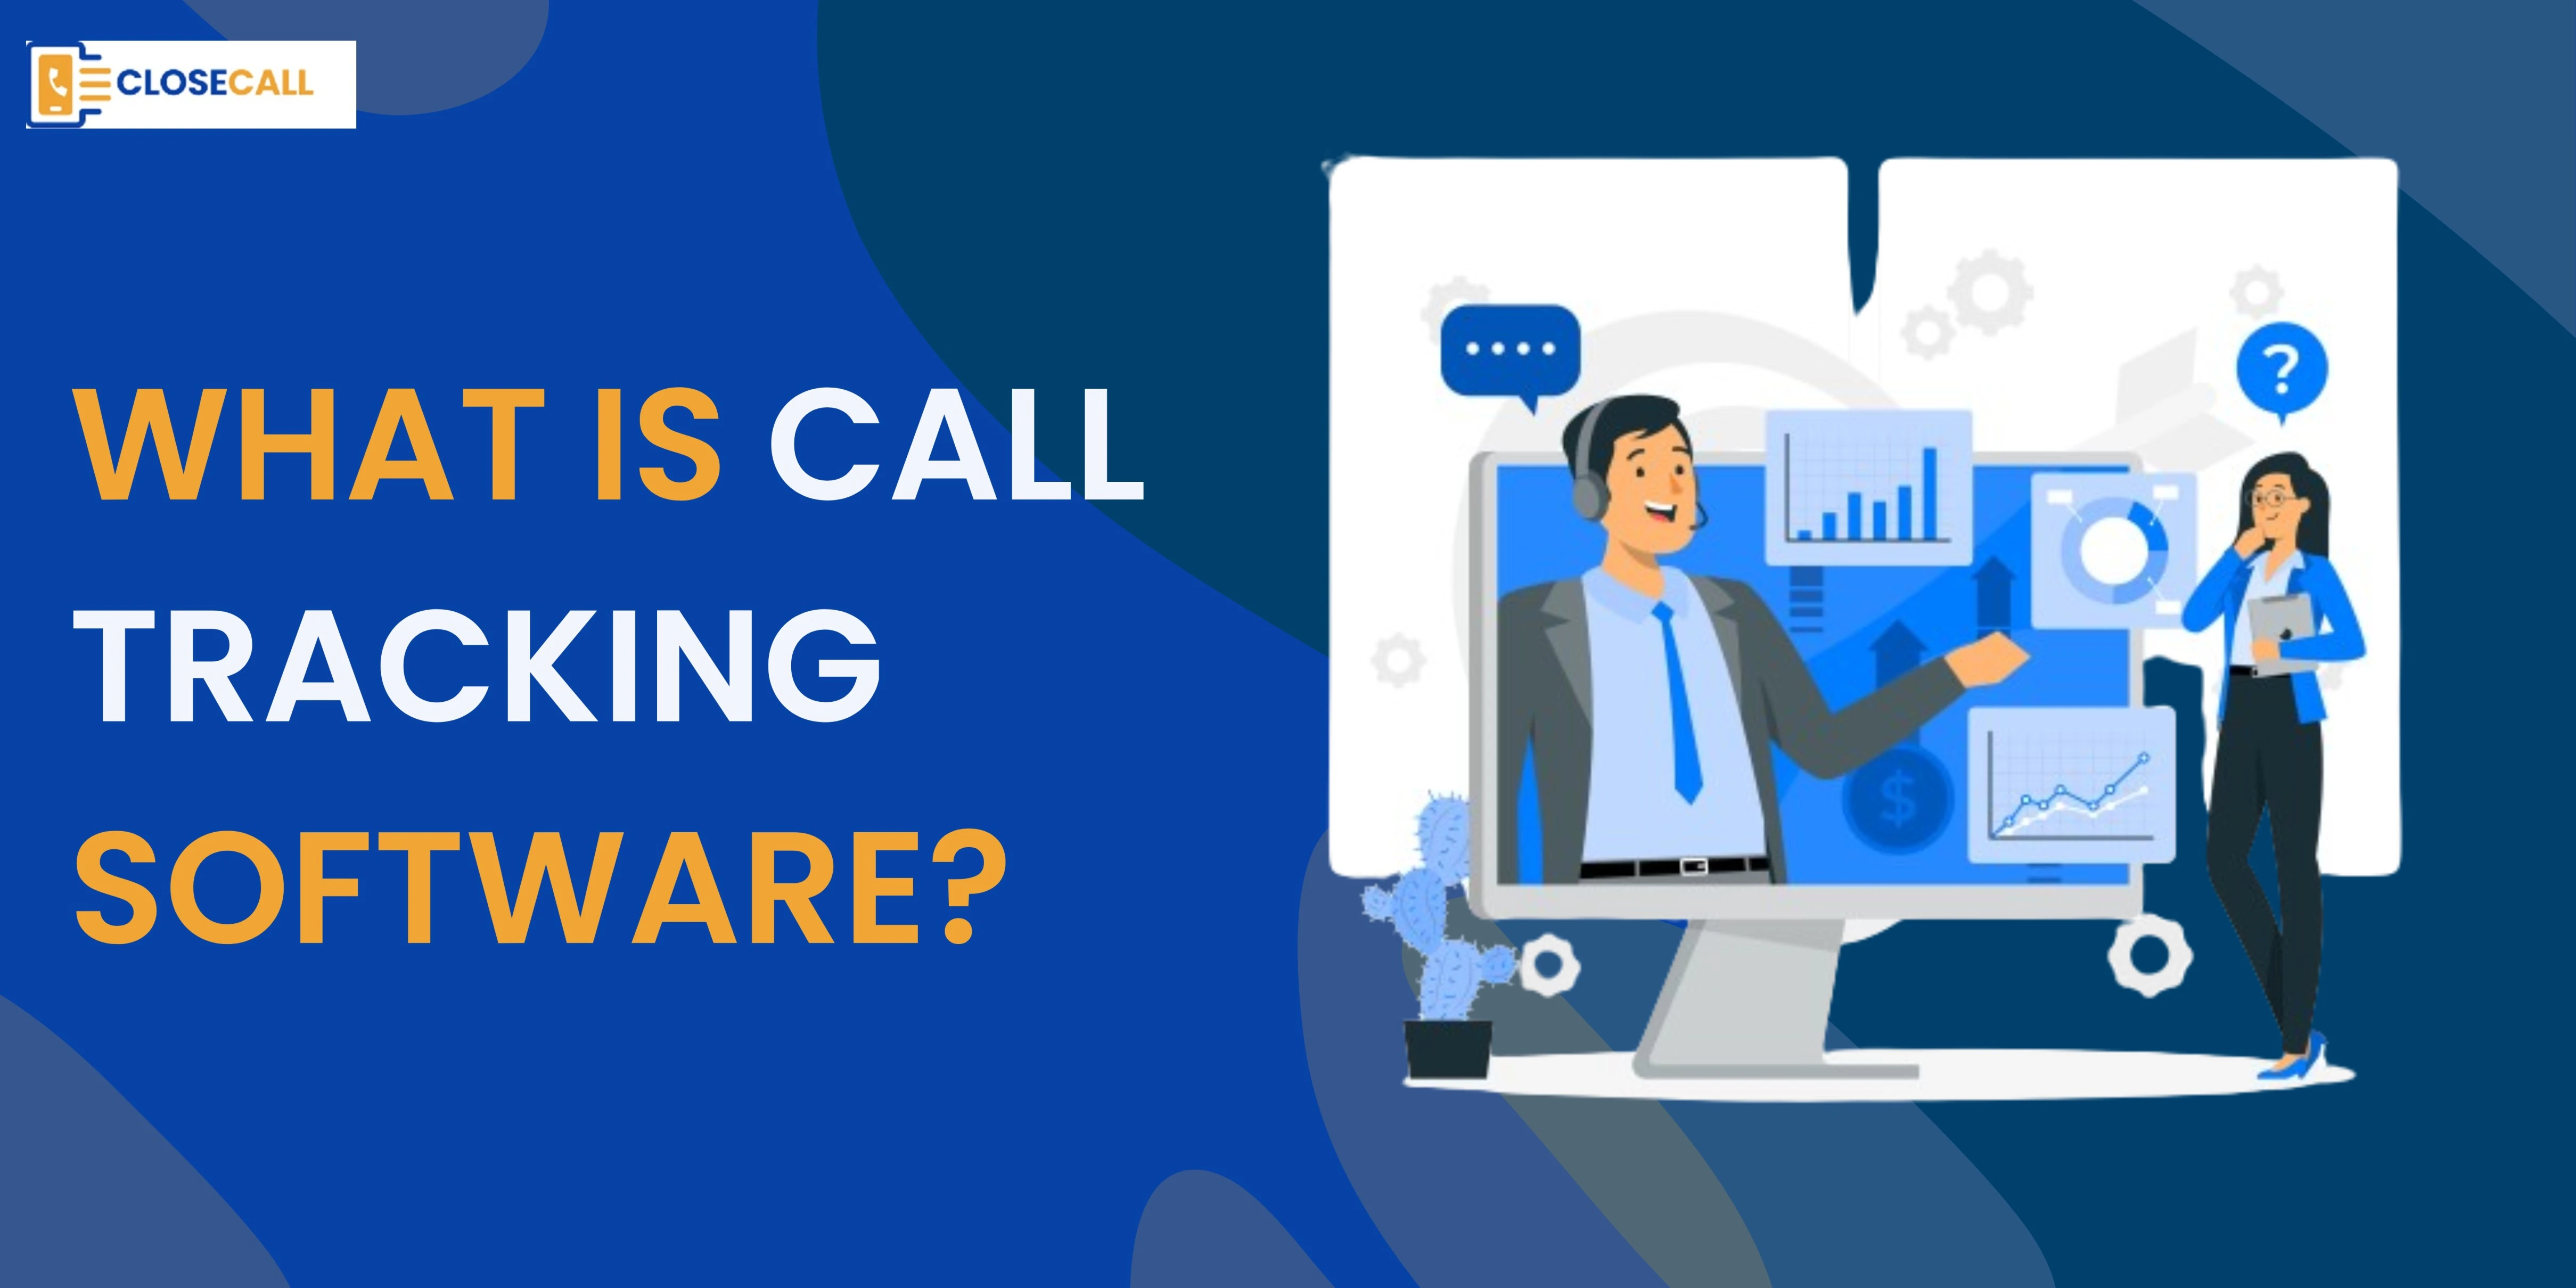 What Is Call Tracking Software?